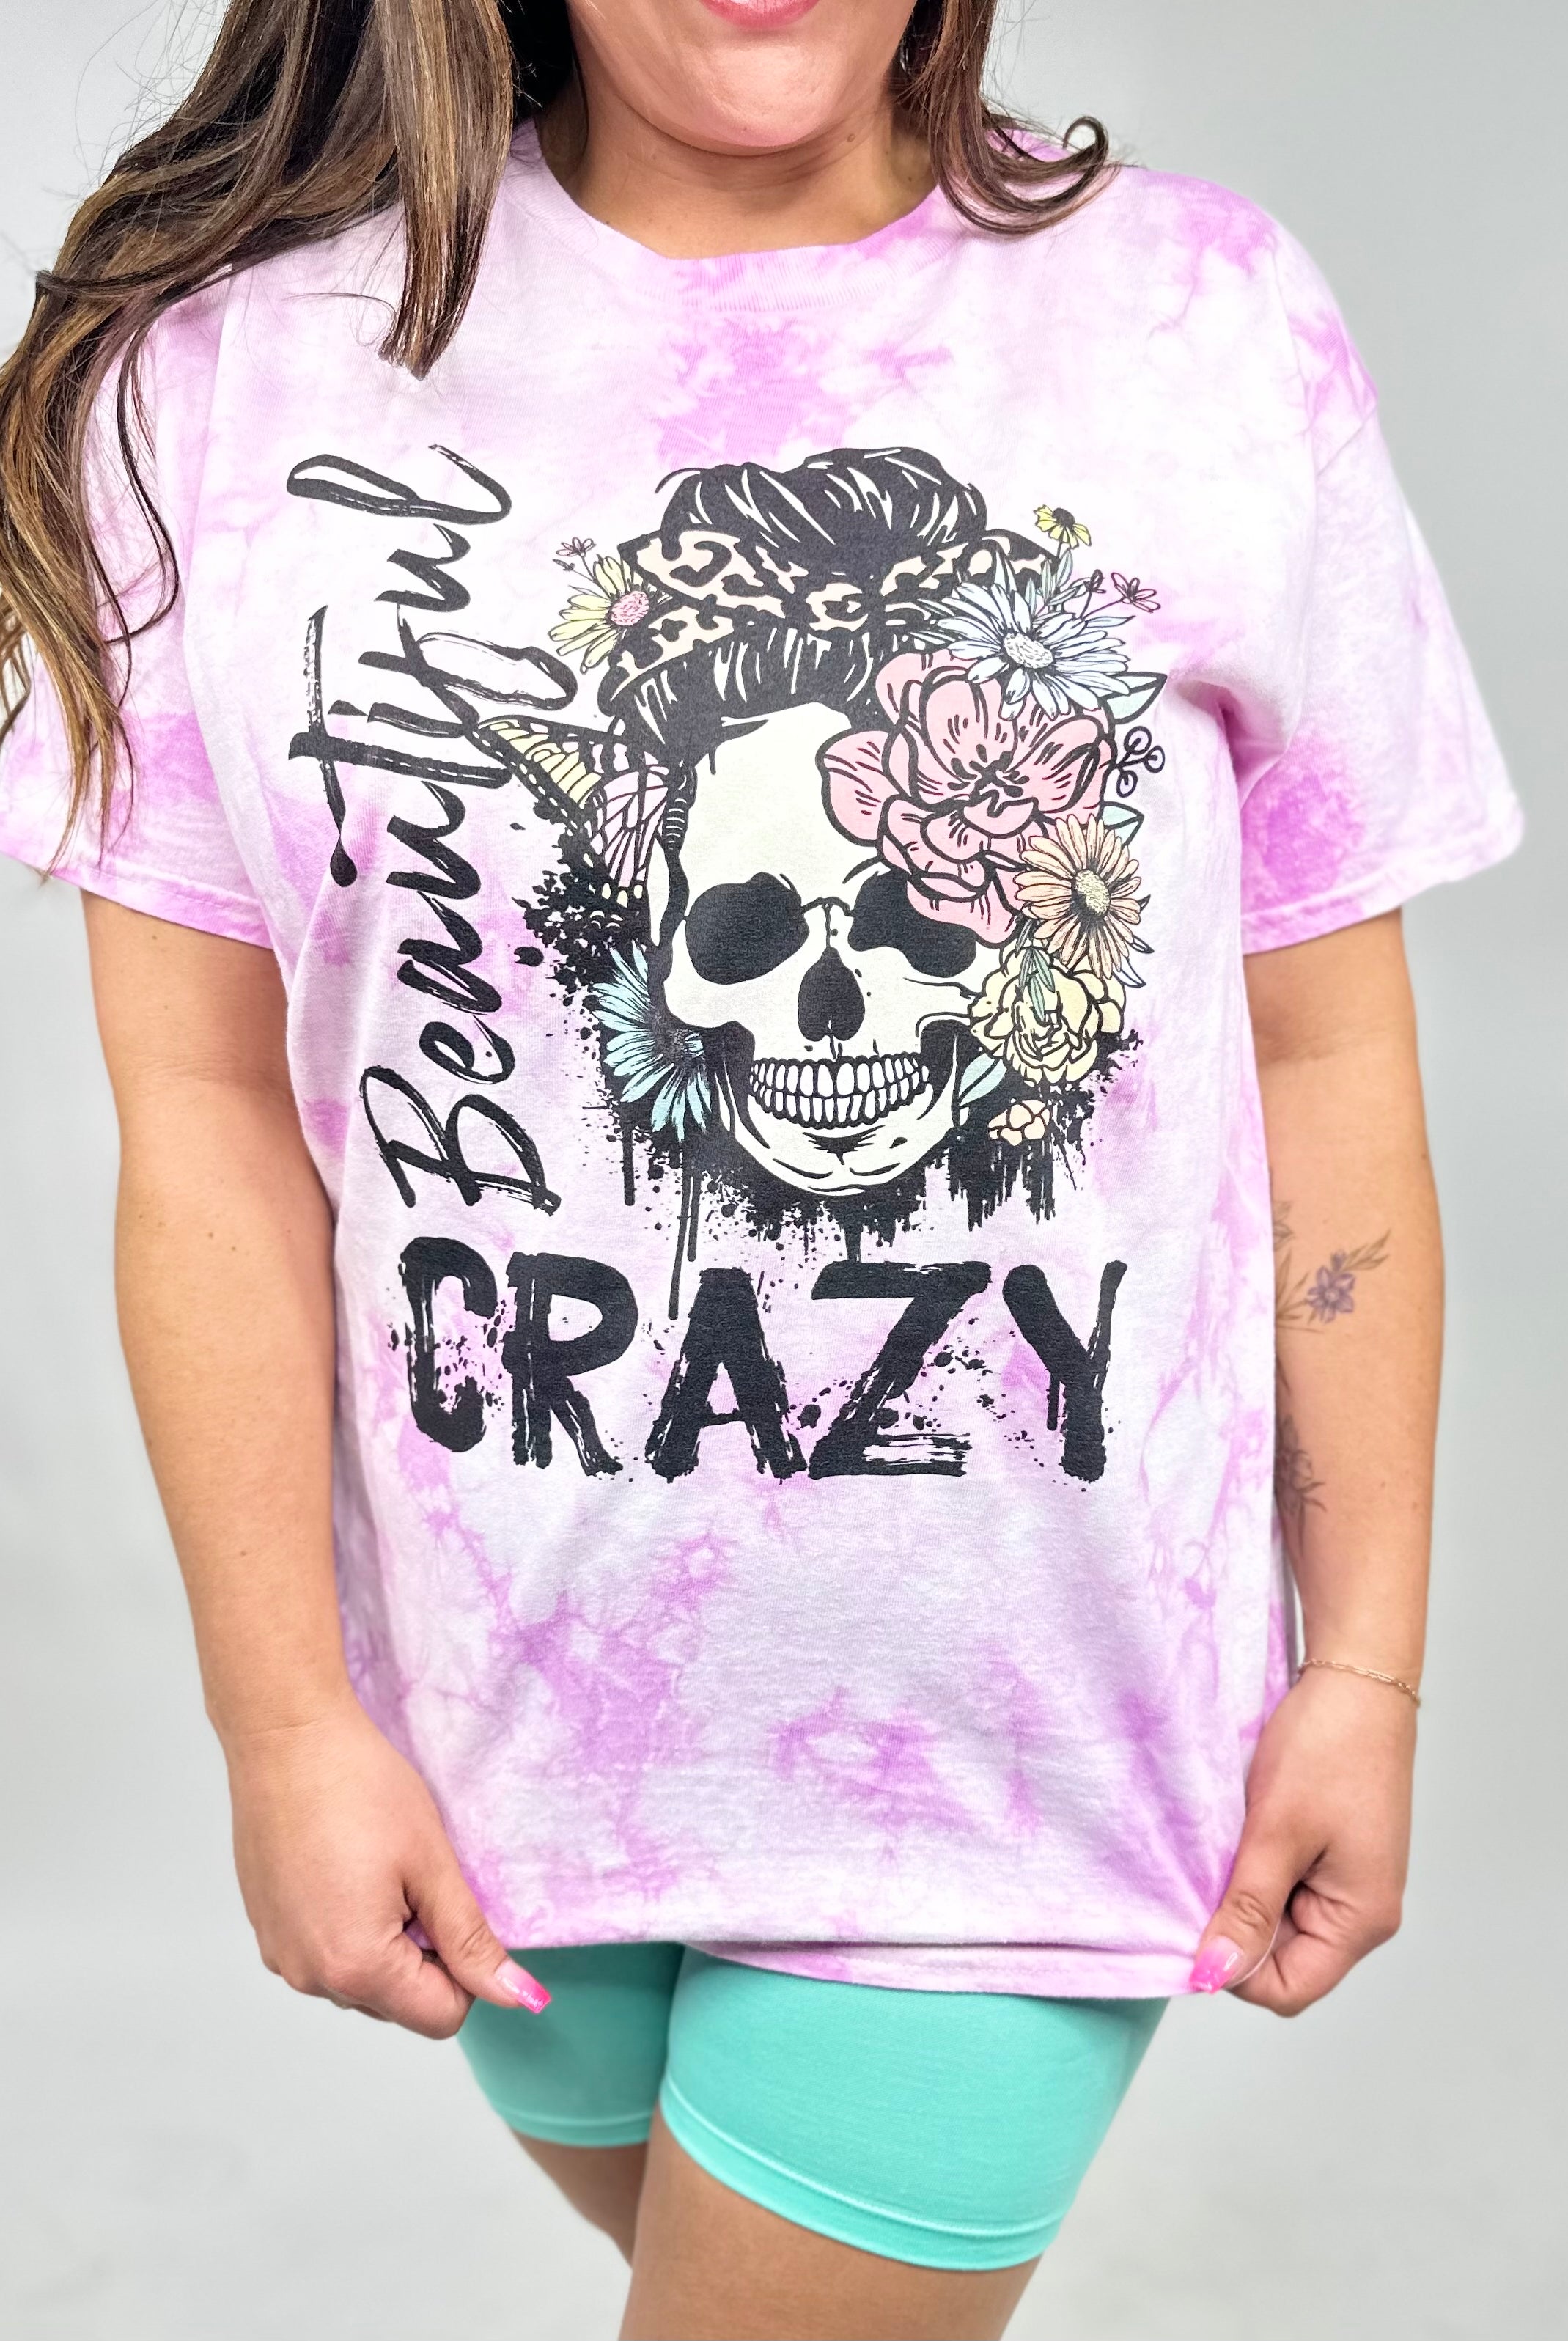 Beautiful Crazy Graphic Tee-130 Graphic Tees-Heathered Boho-Heathered Boho Boutique, Women's Fashion and Accessories in Palmetto, FL